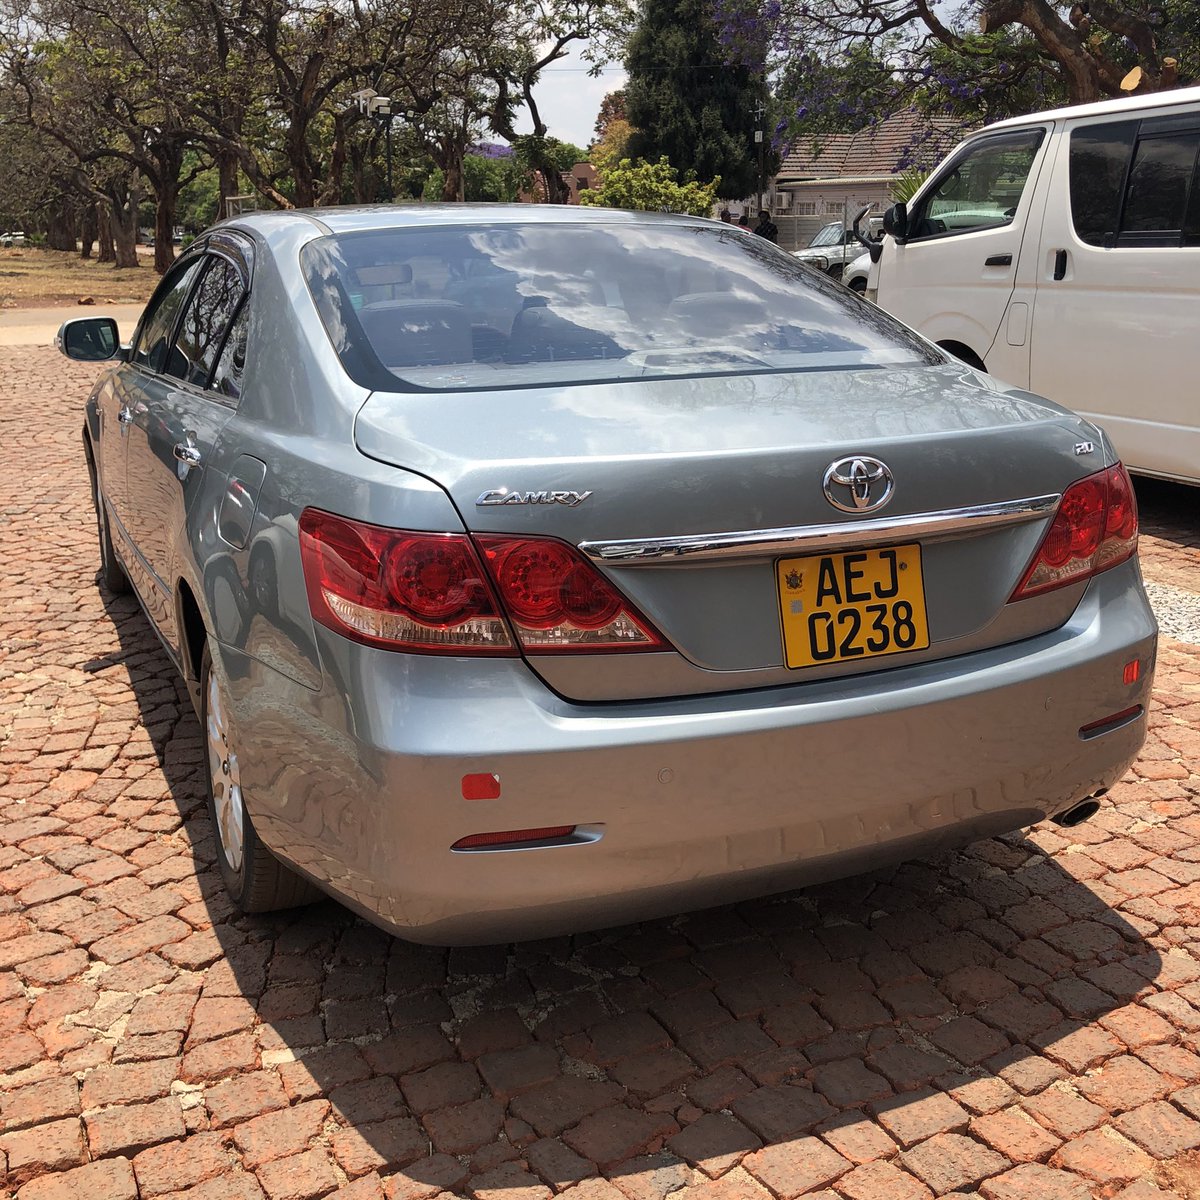 Toyota
Camry G
Auto
Petrol
97000kms
Leather
Very clean

$5200
@iMisred @redmarketsunday #redmarketsunday 
Call or App 0739677357
Email: sales@cruizautocity.com